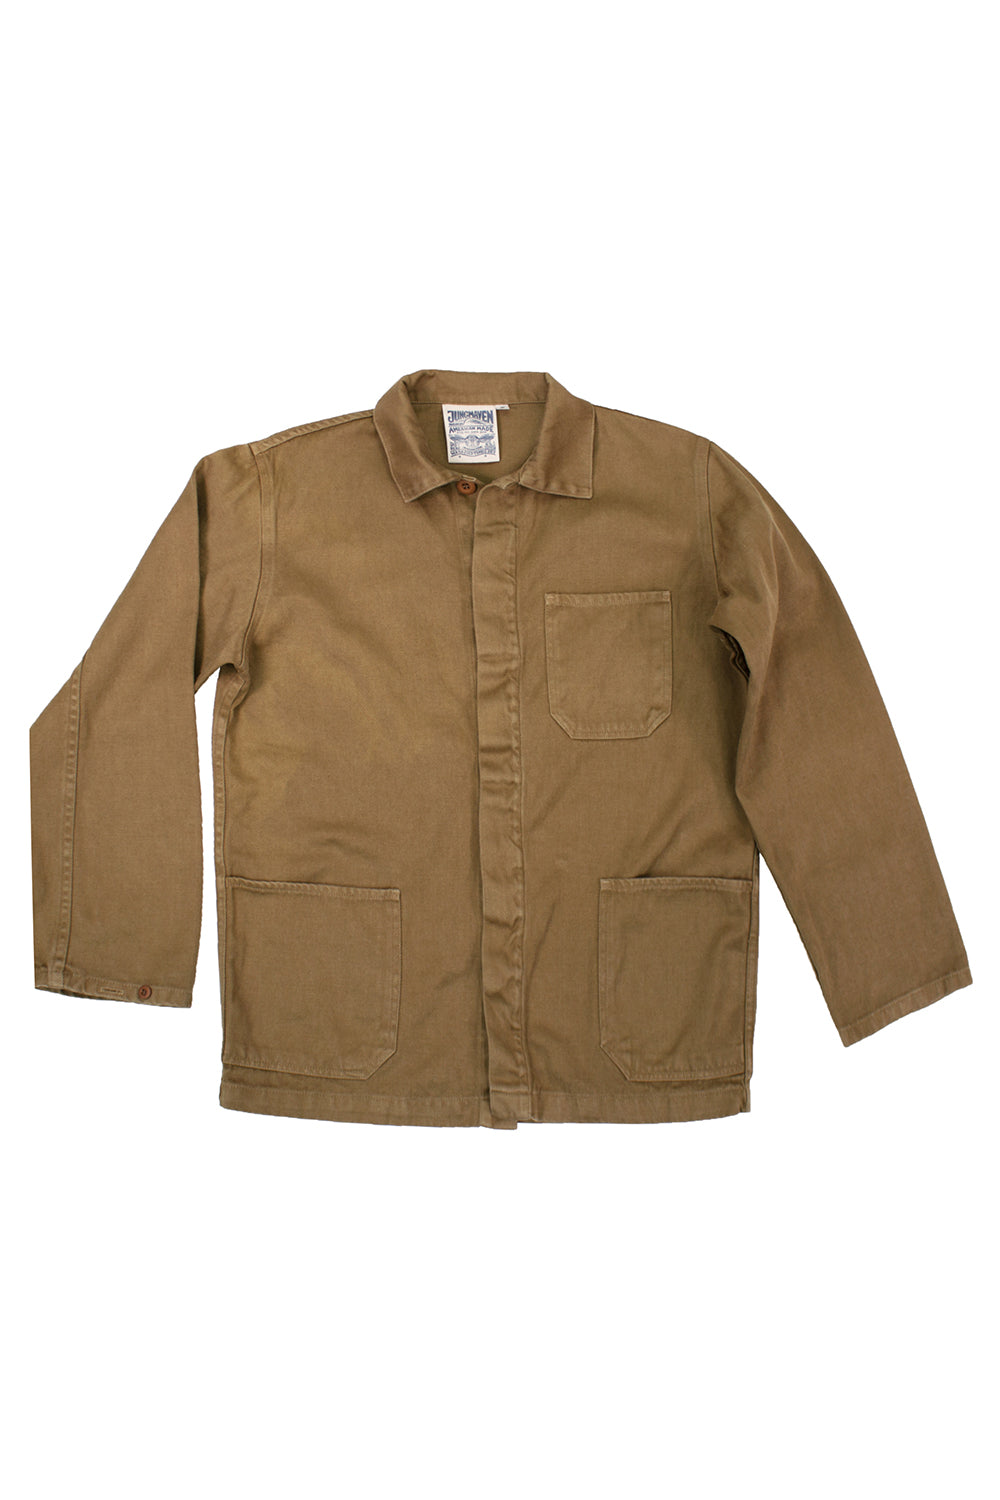 Olympic Jacket | Jungmaven Hemp Clothing & Accessories / Color: Coyote